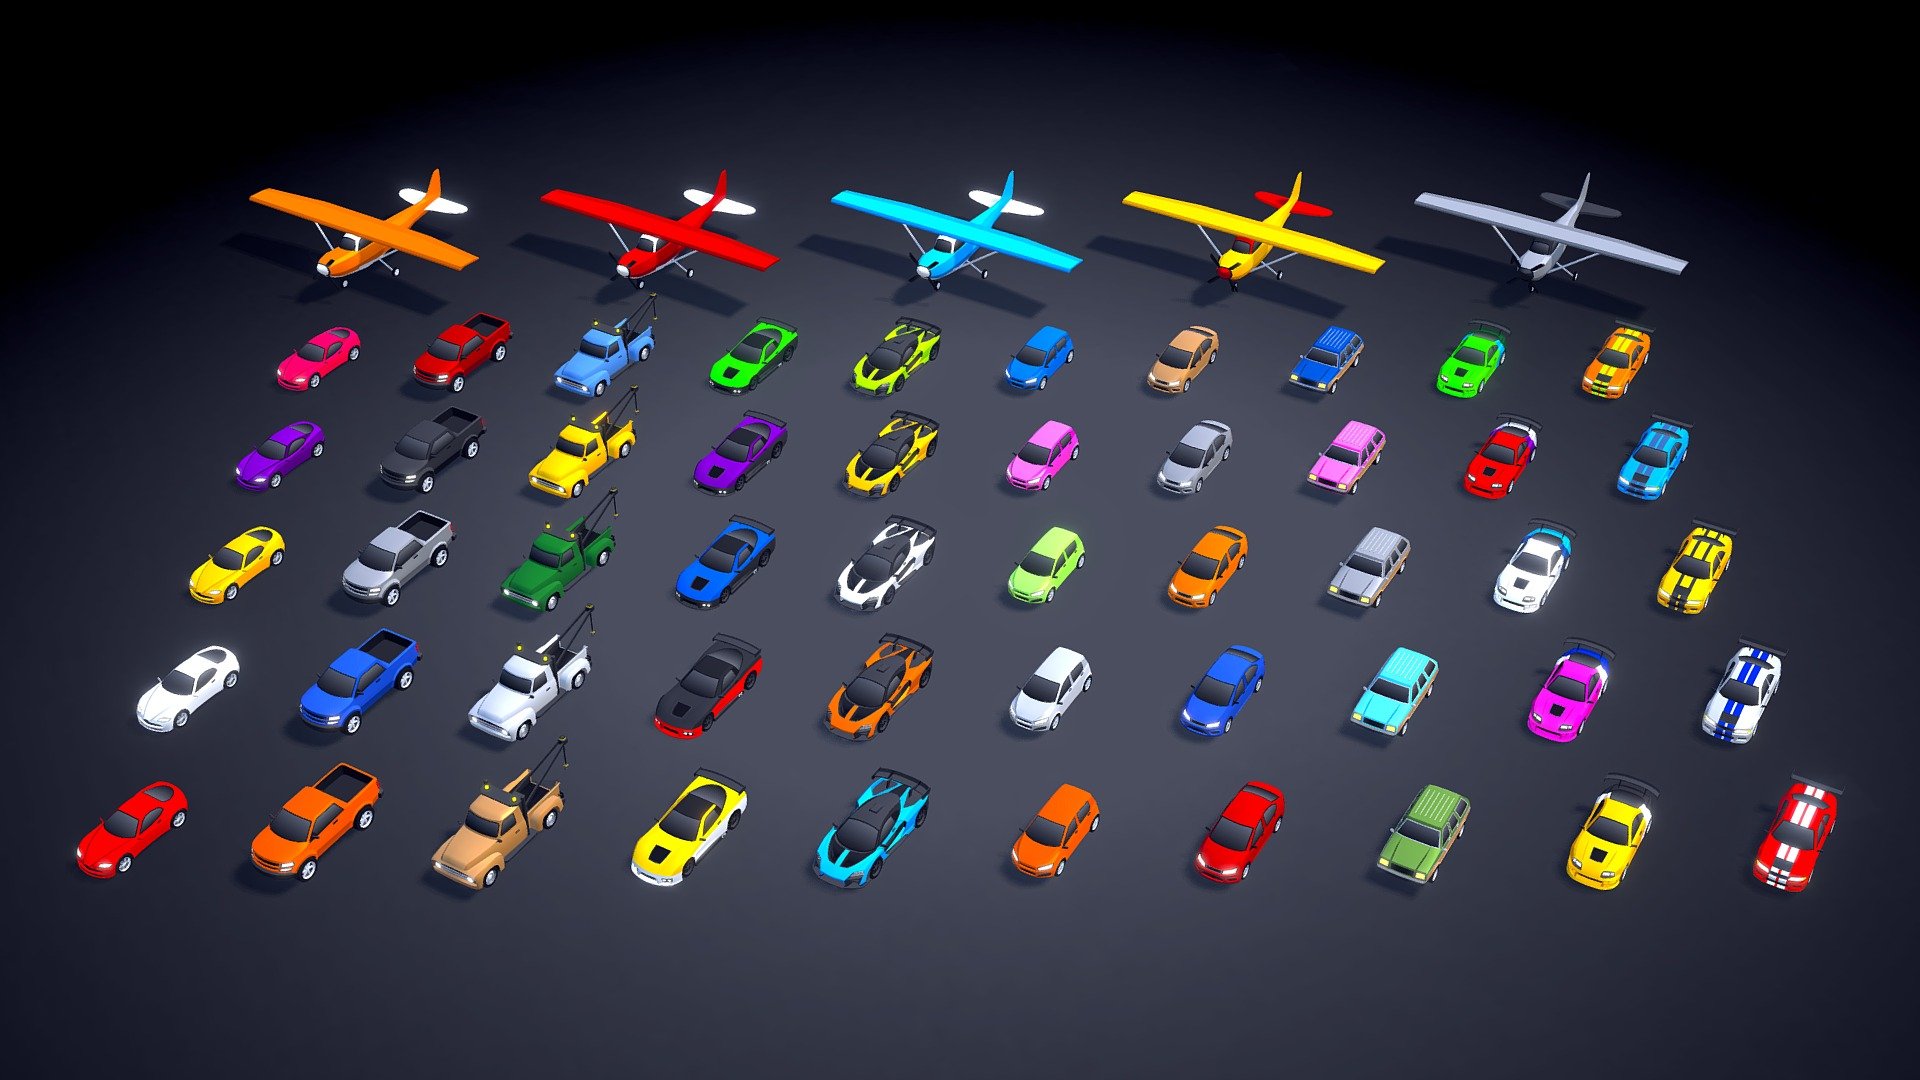 This is the July update of my asset called ARCADE: Ultimate Vehicles Pack. This update will be launched on July 4th. Available in Unity3D (in the Unity Asset Store) and Sketchfab! (FBX + UNITY Files included).

This update includes 11 new vehicles (racing cars, trucks, and drift cars).

Best regards, Mena 3d model